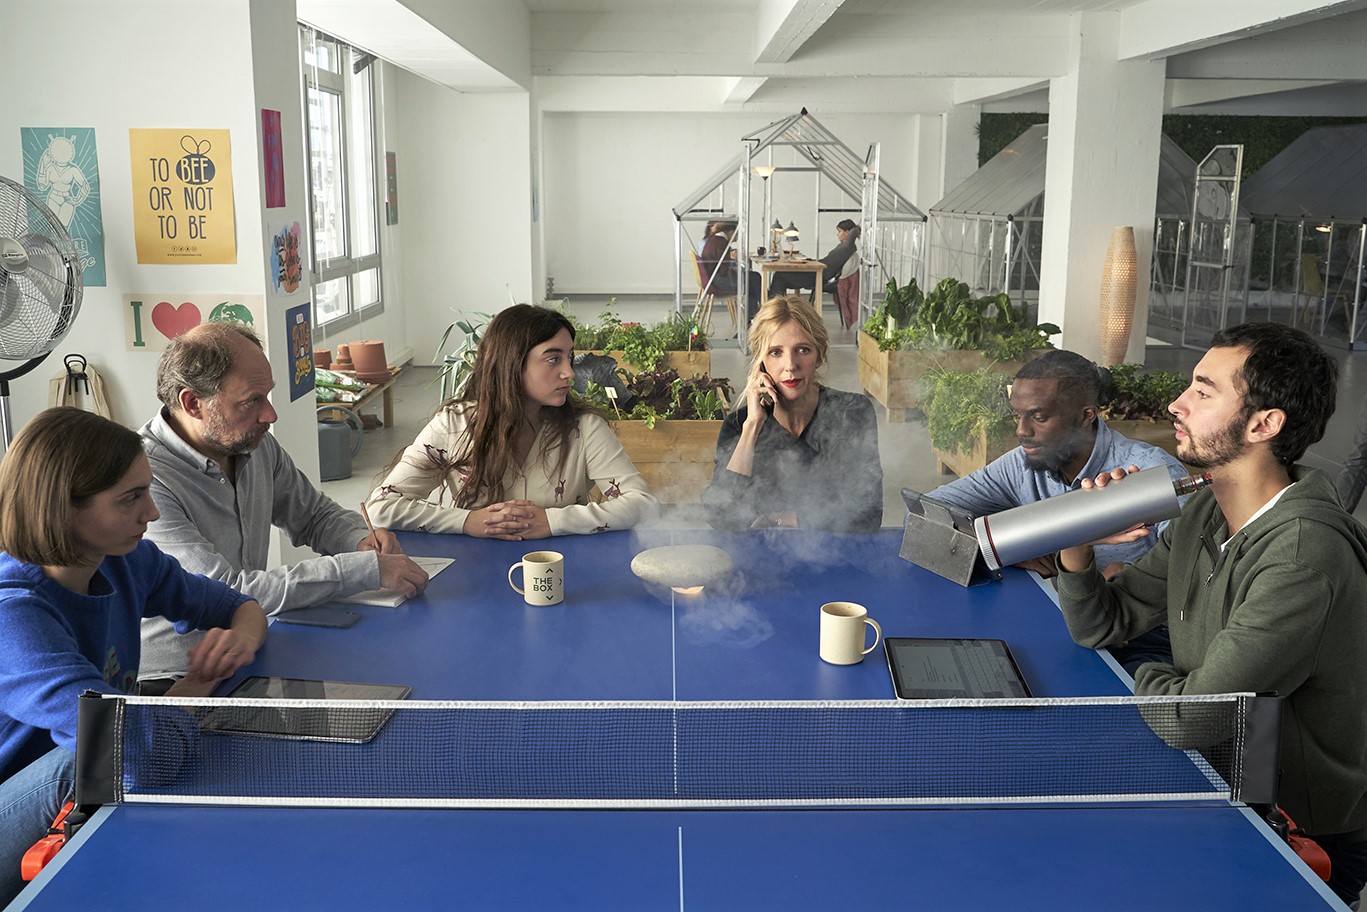 Employees of fictional company The Box have a meeting at the ping pong table in the film French Tech